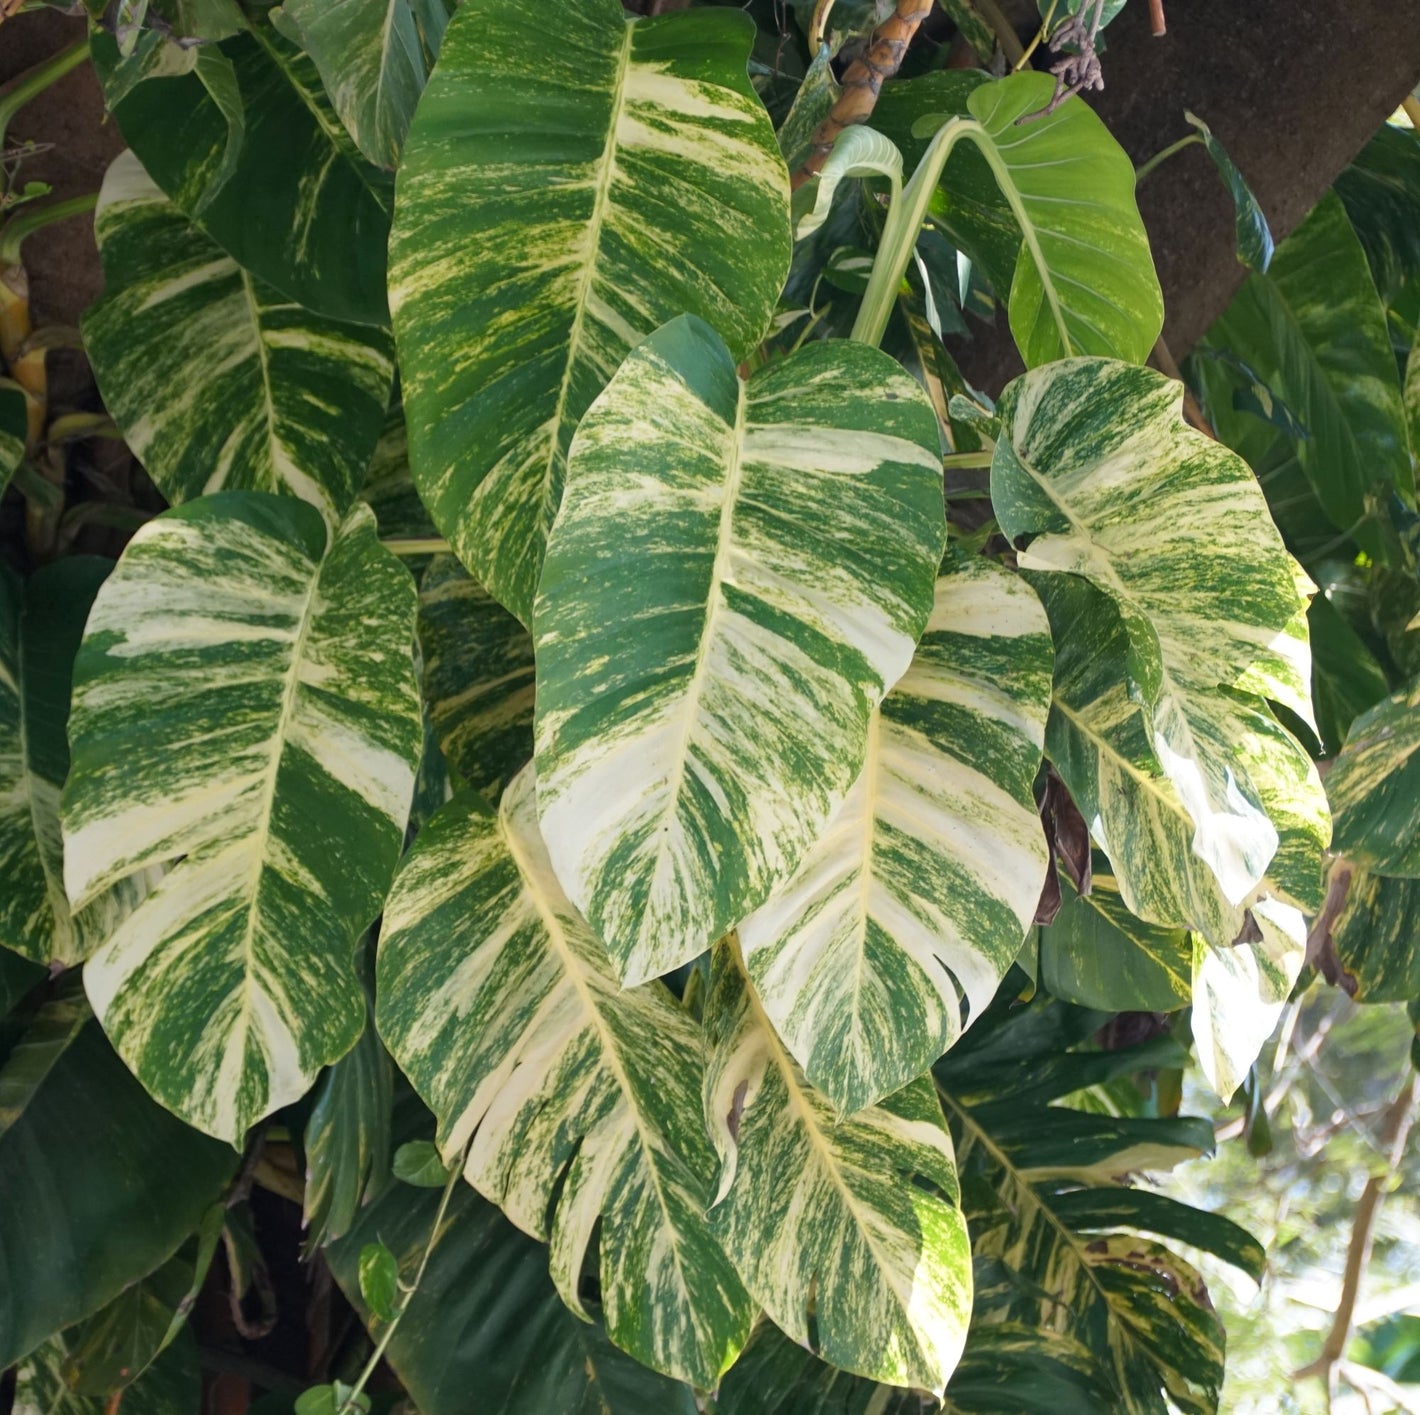 A photo of a massive Hawaiian pothos with striking yellow variegations, climbing up a tree trunk. The sunlight illuminates the vibrant colors and patterns of the leaves.